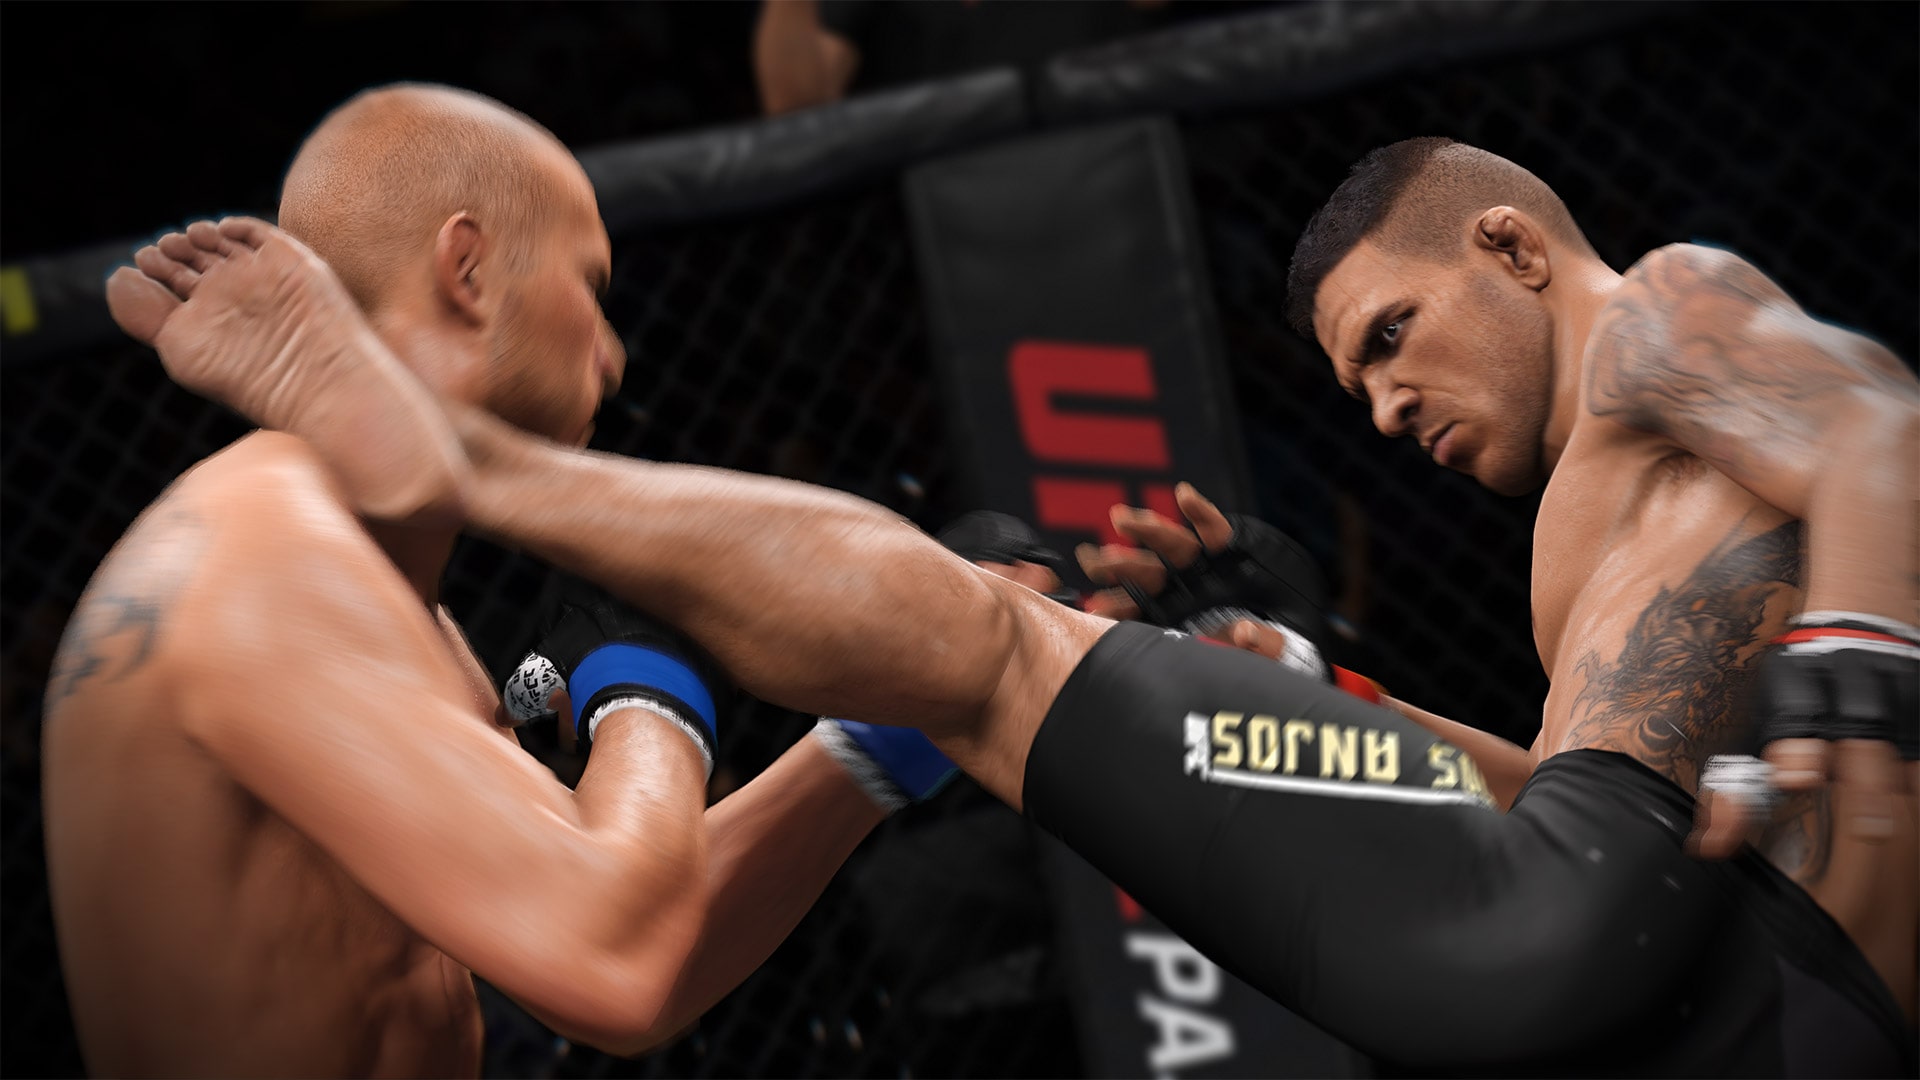 ufc 3 playstation store